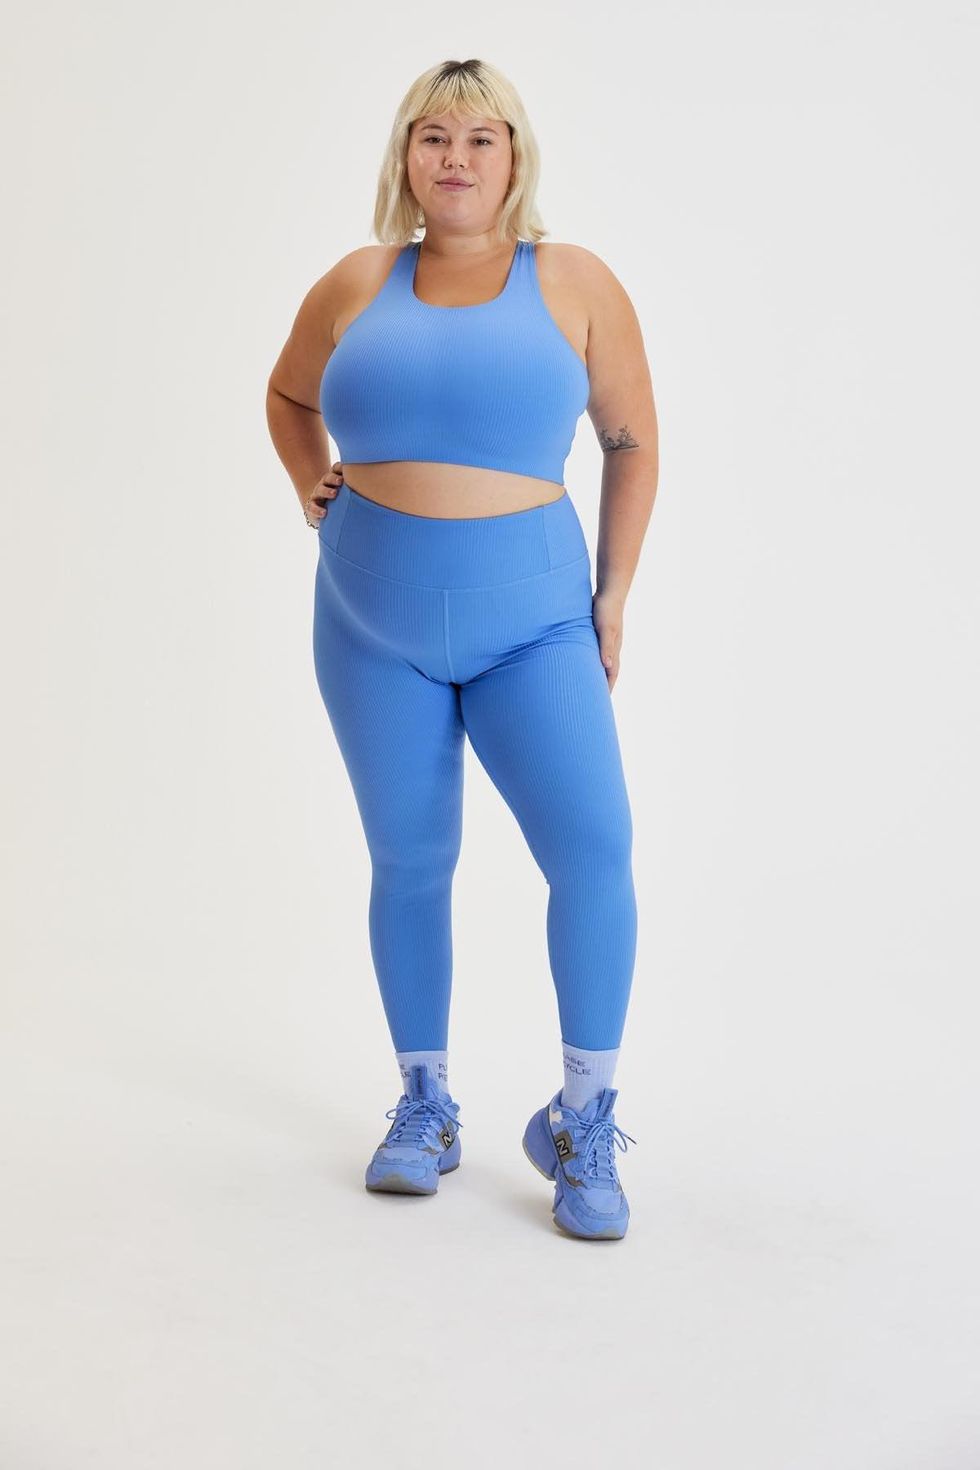 The most flattering activewear on all body types 🥹👏🏻 These leggings